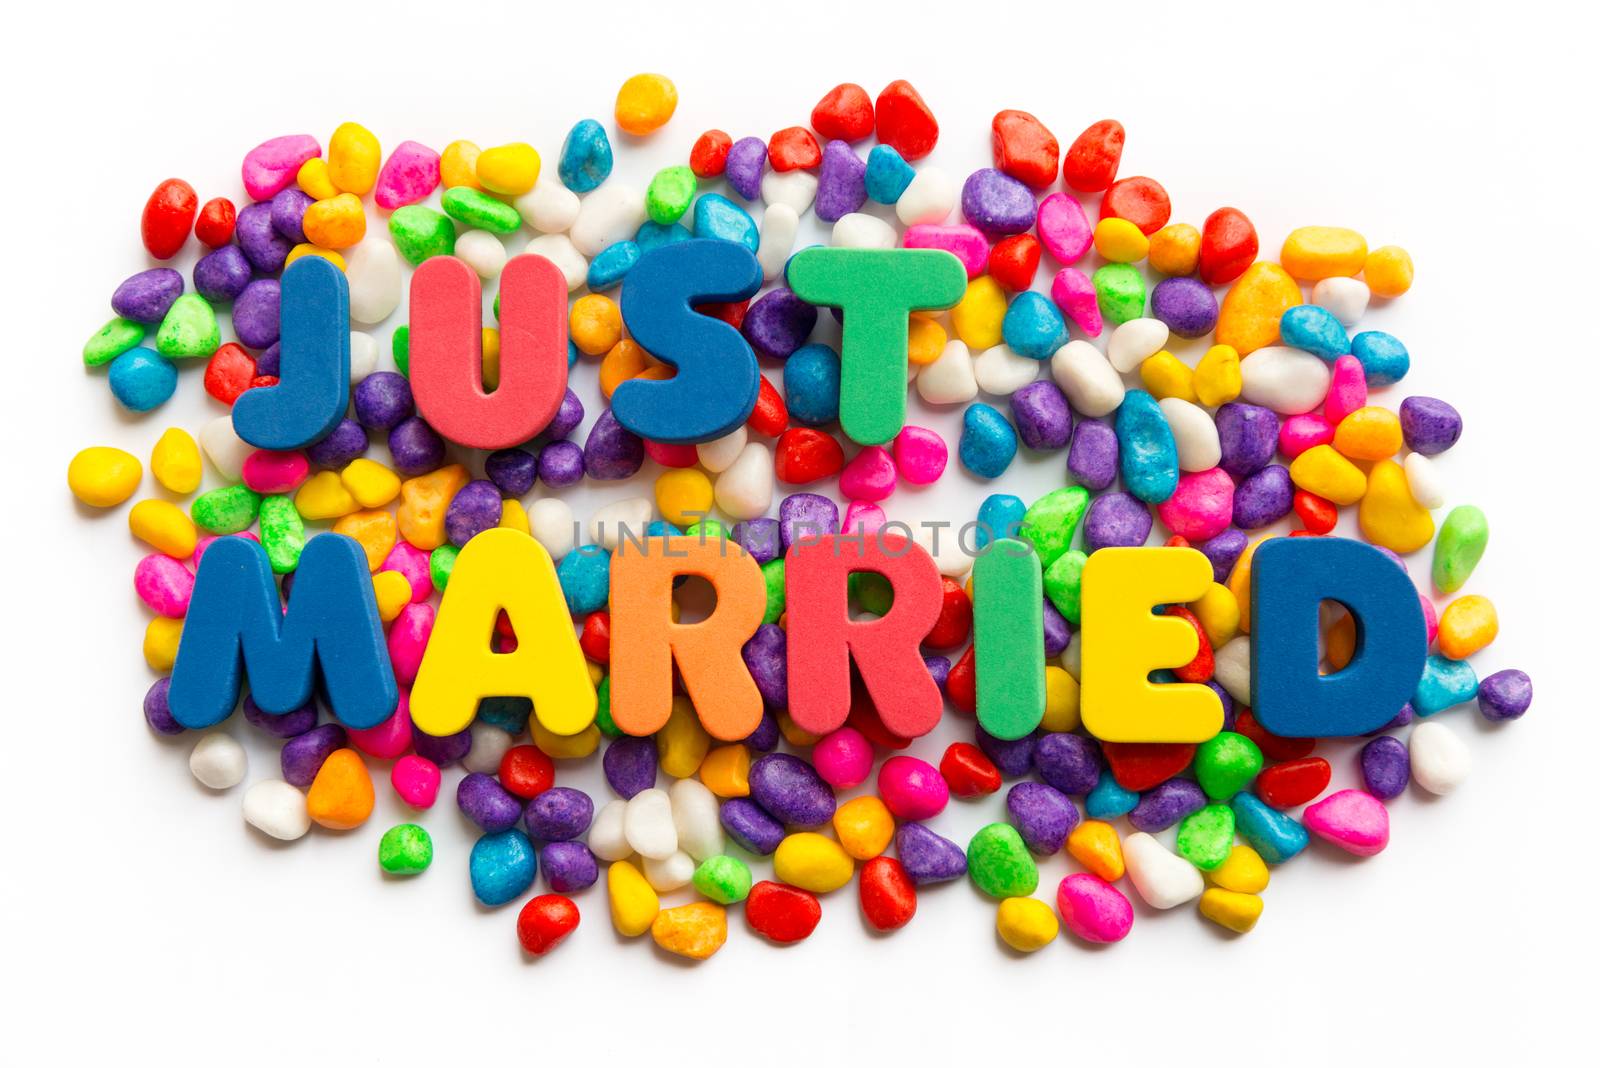 just married word in colorful stone by sohel.parvez@hotmail.com